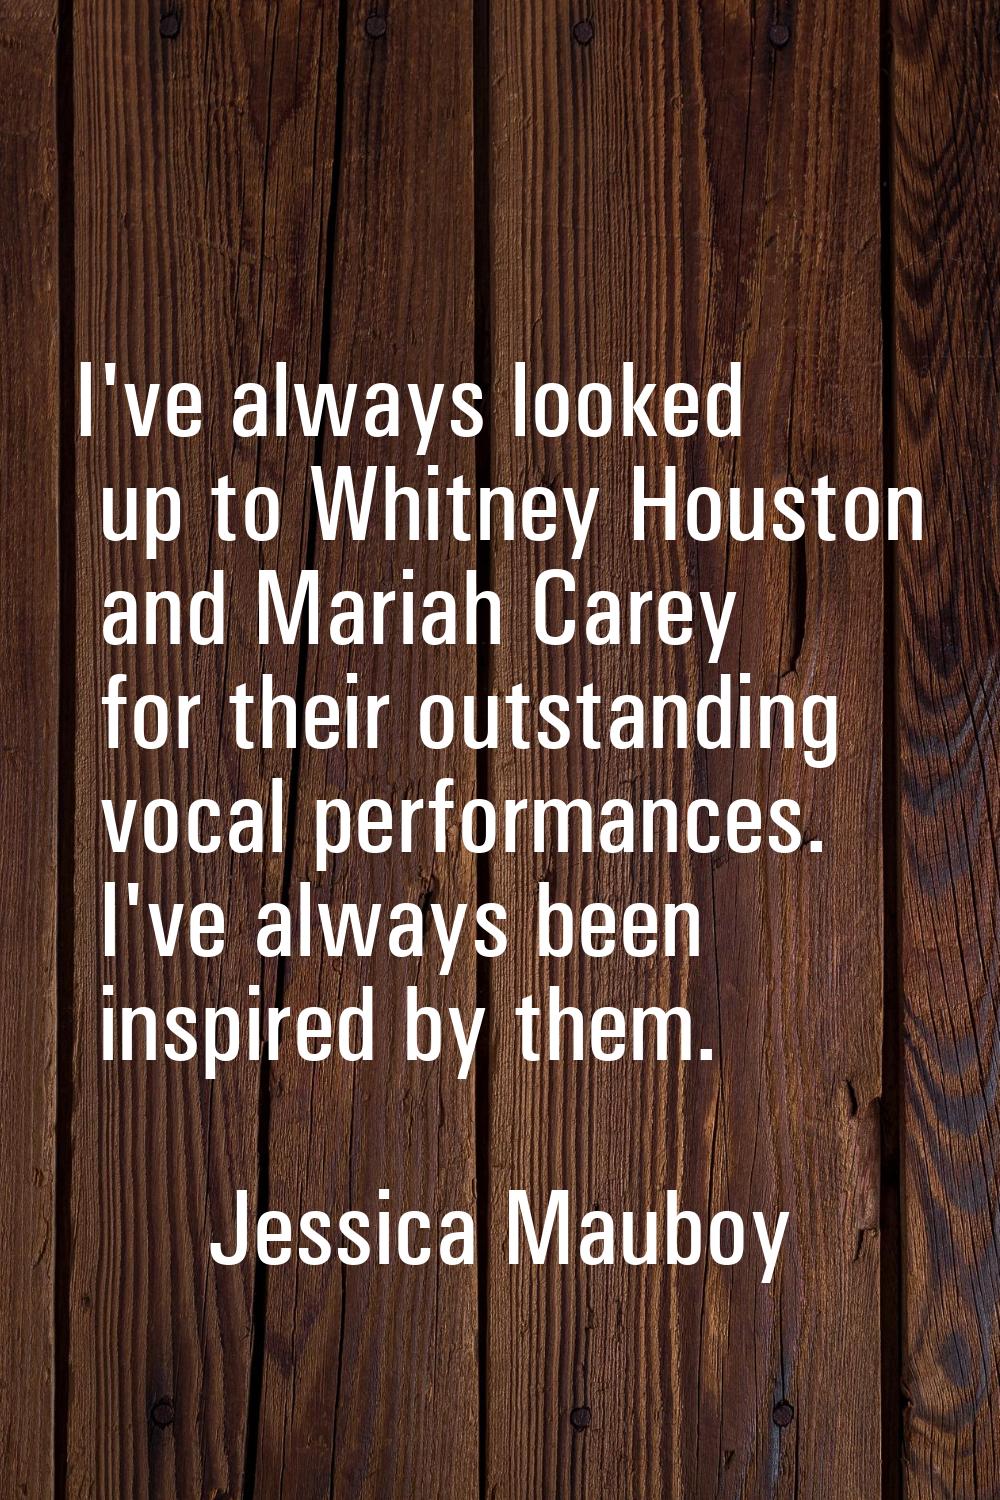 I've always looked up to Whitney Houston and Mariah Carey for their outstanding vocal performances.